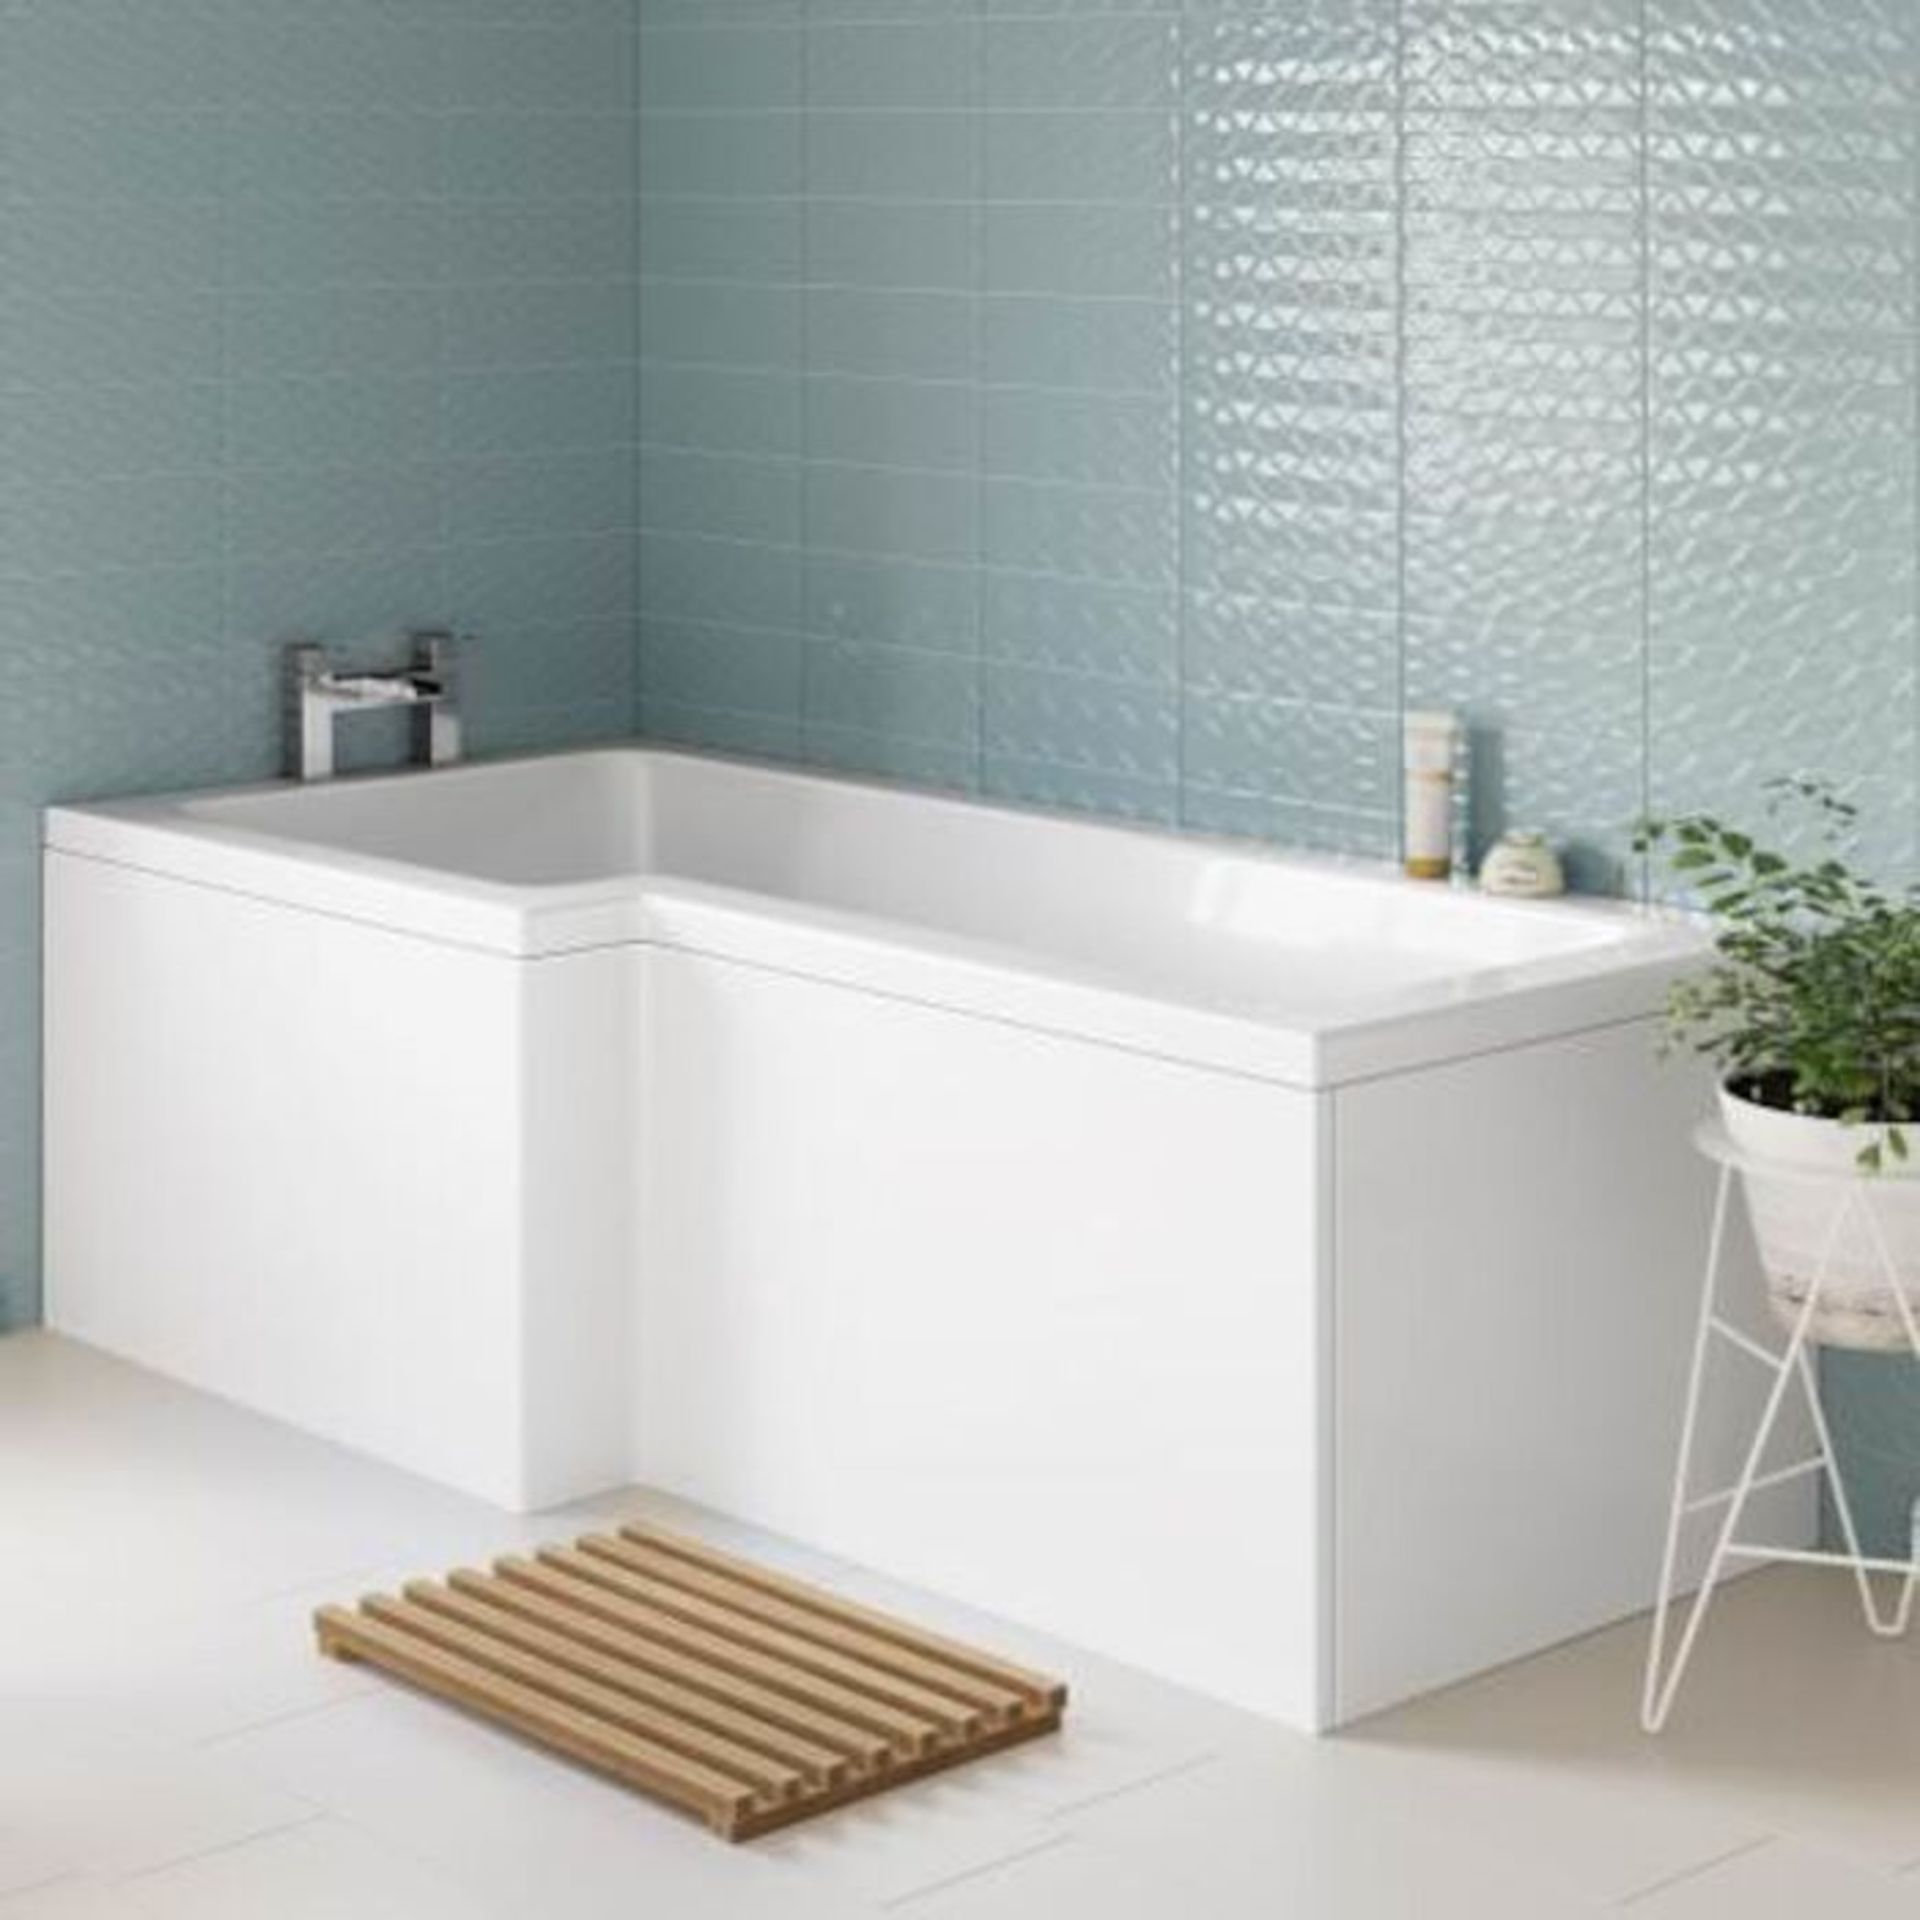 New (G10) 1700x850mm Left Hand L-Shaped Bath. RRP £239.99. Constructed from high quality acry...